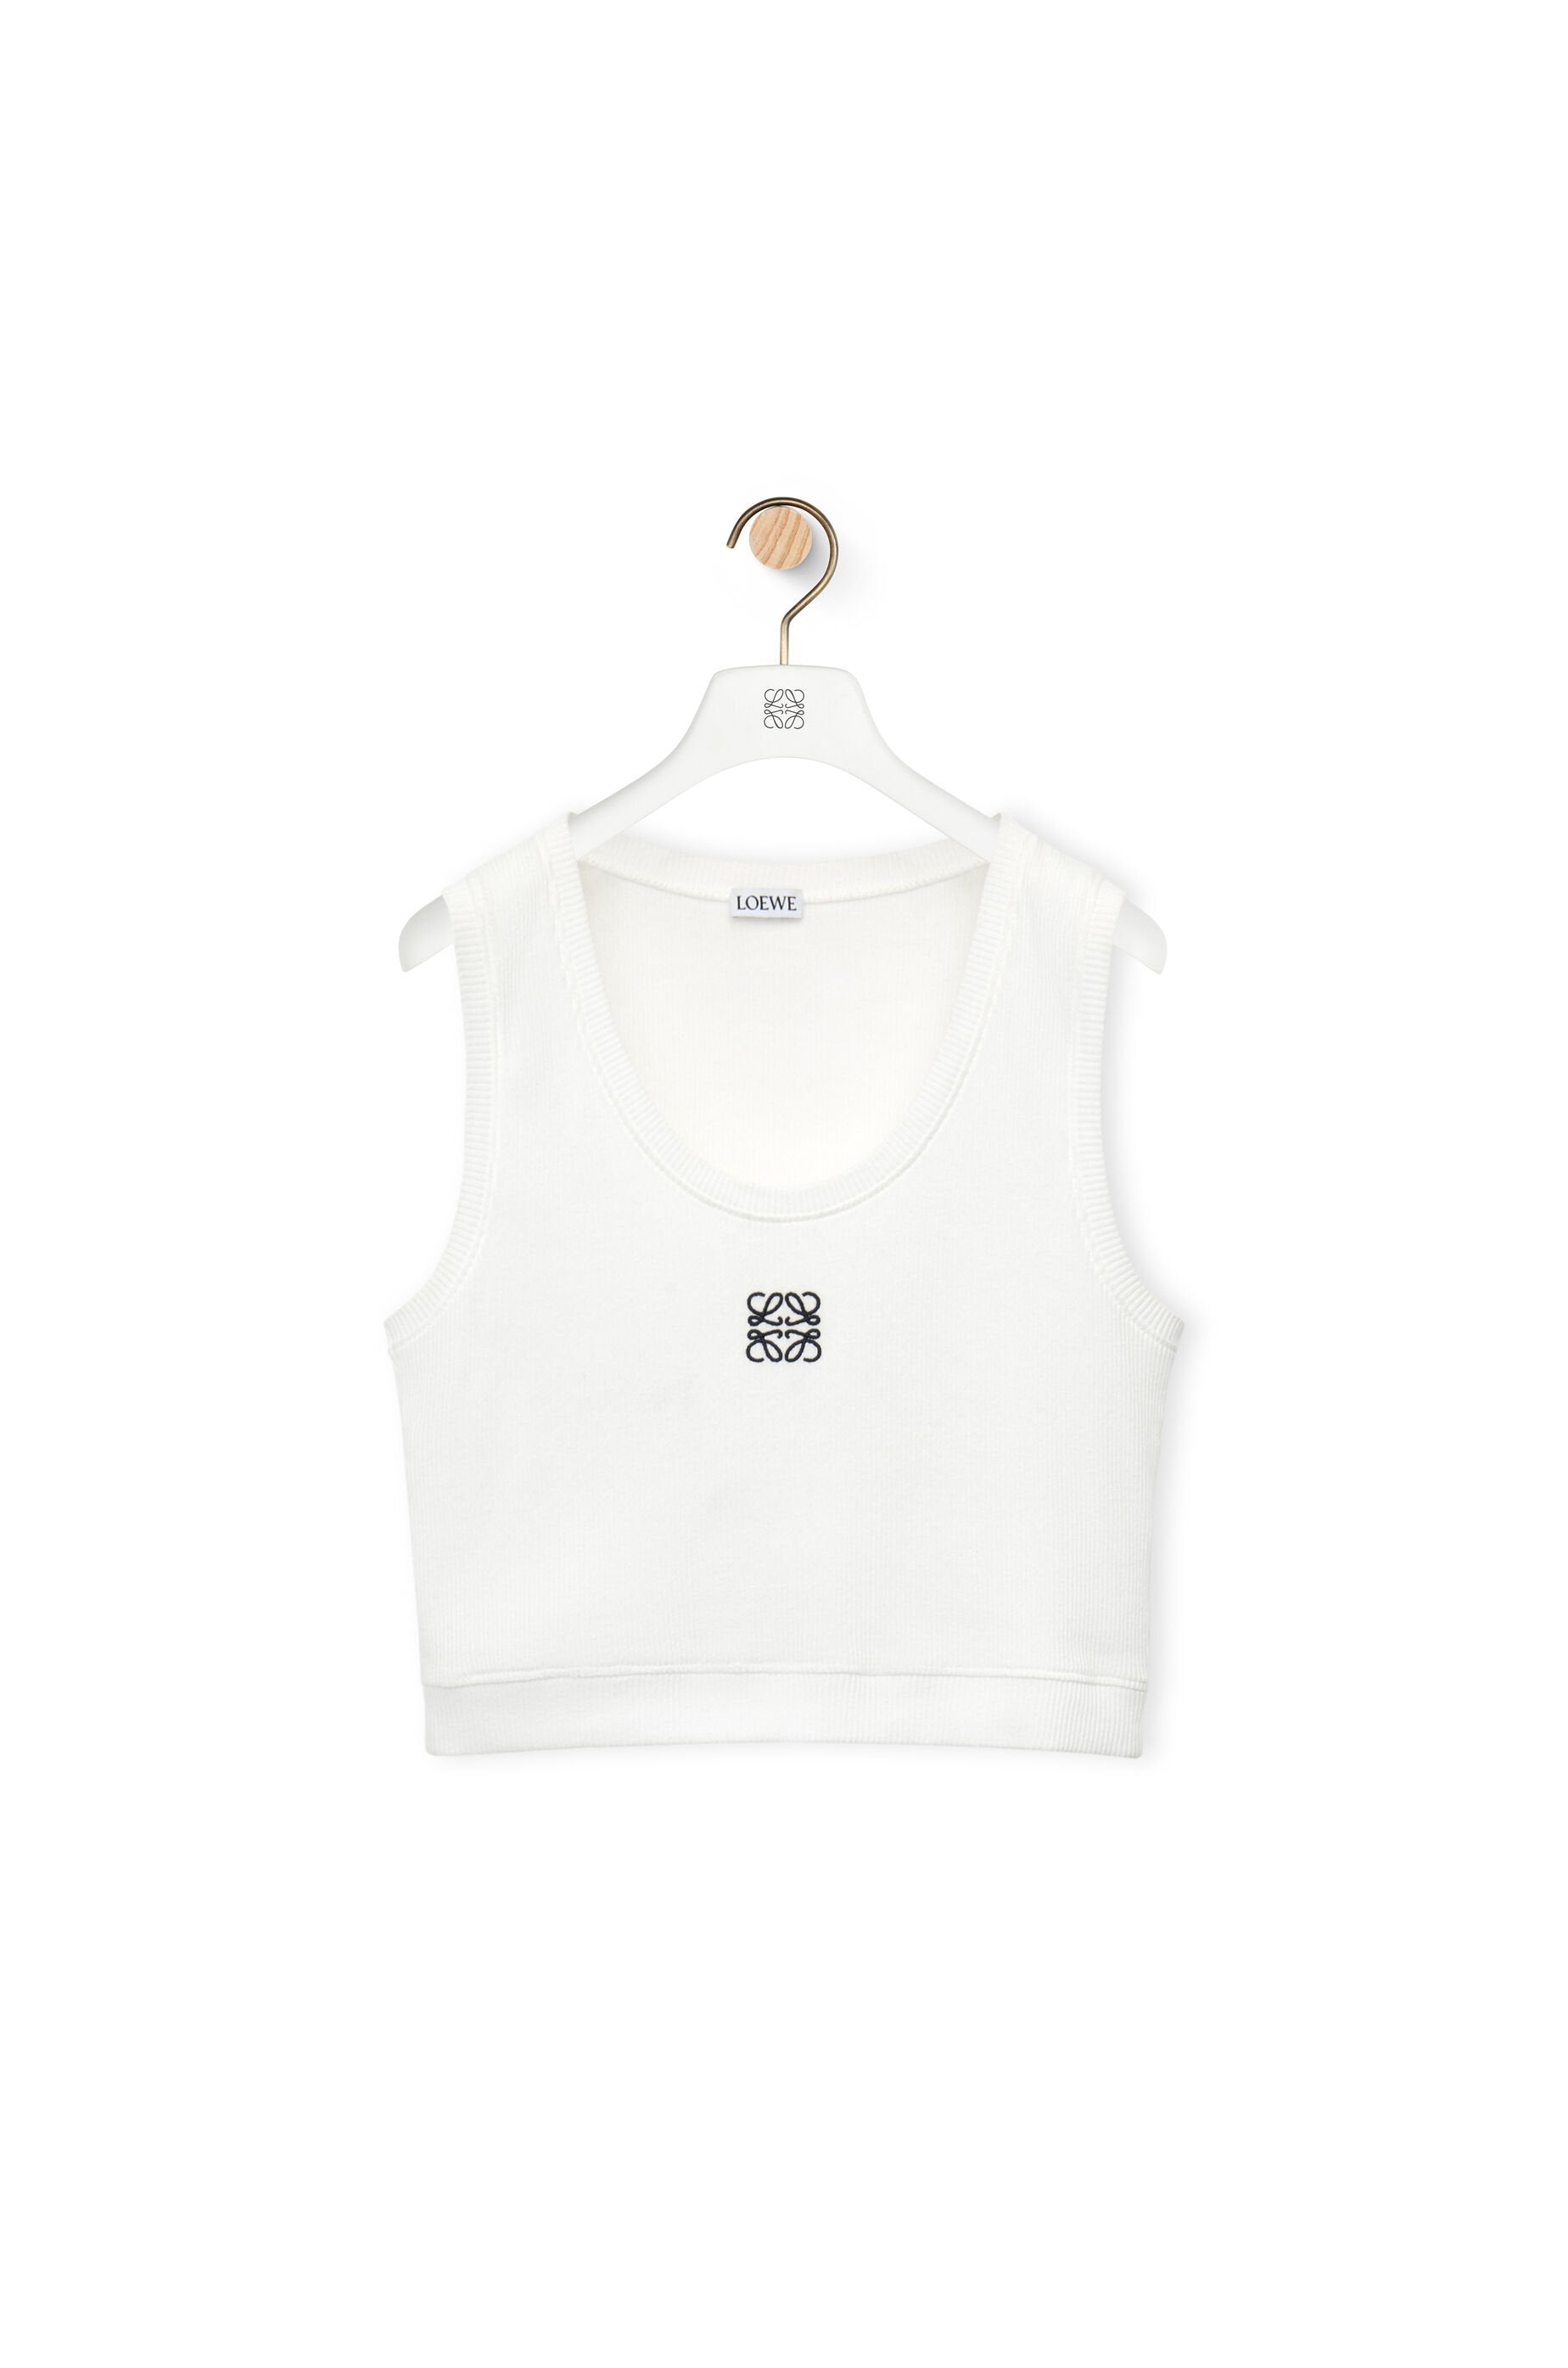 Something Borrowed. White ribbed tank top with LOEWE logo embroidery.